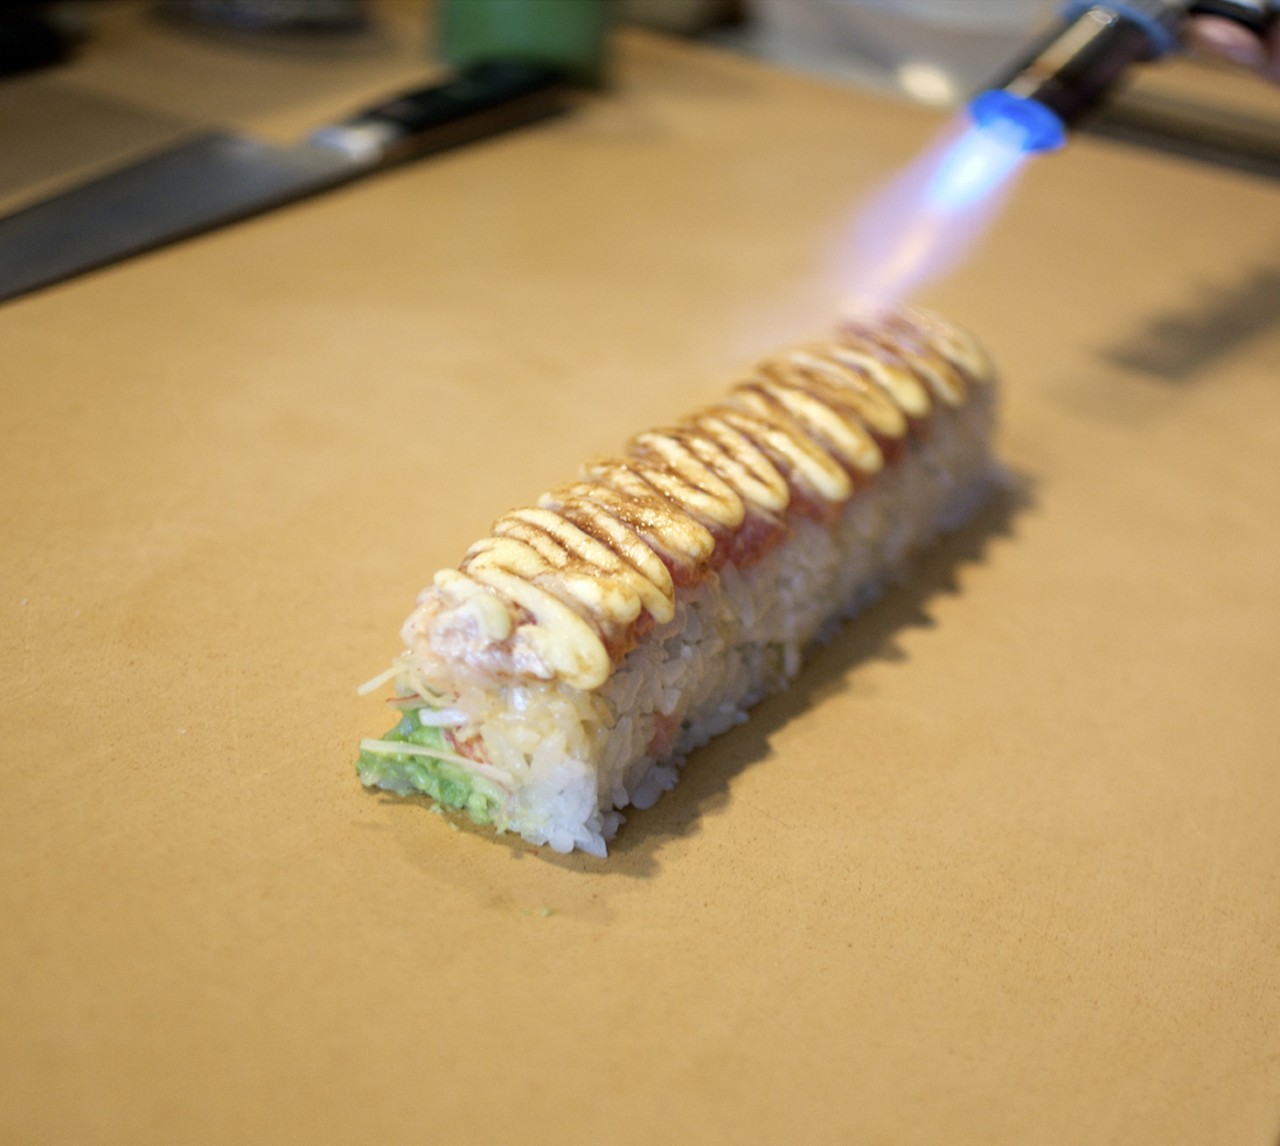 Sushi preparation, never a disappointment. I heart kitchen torches!